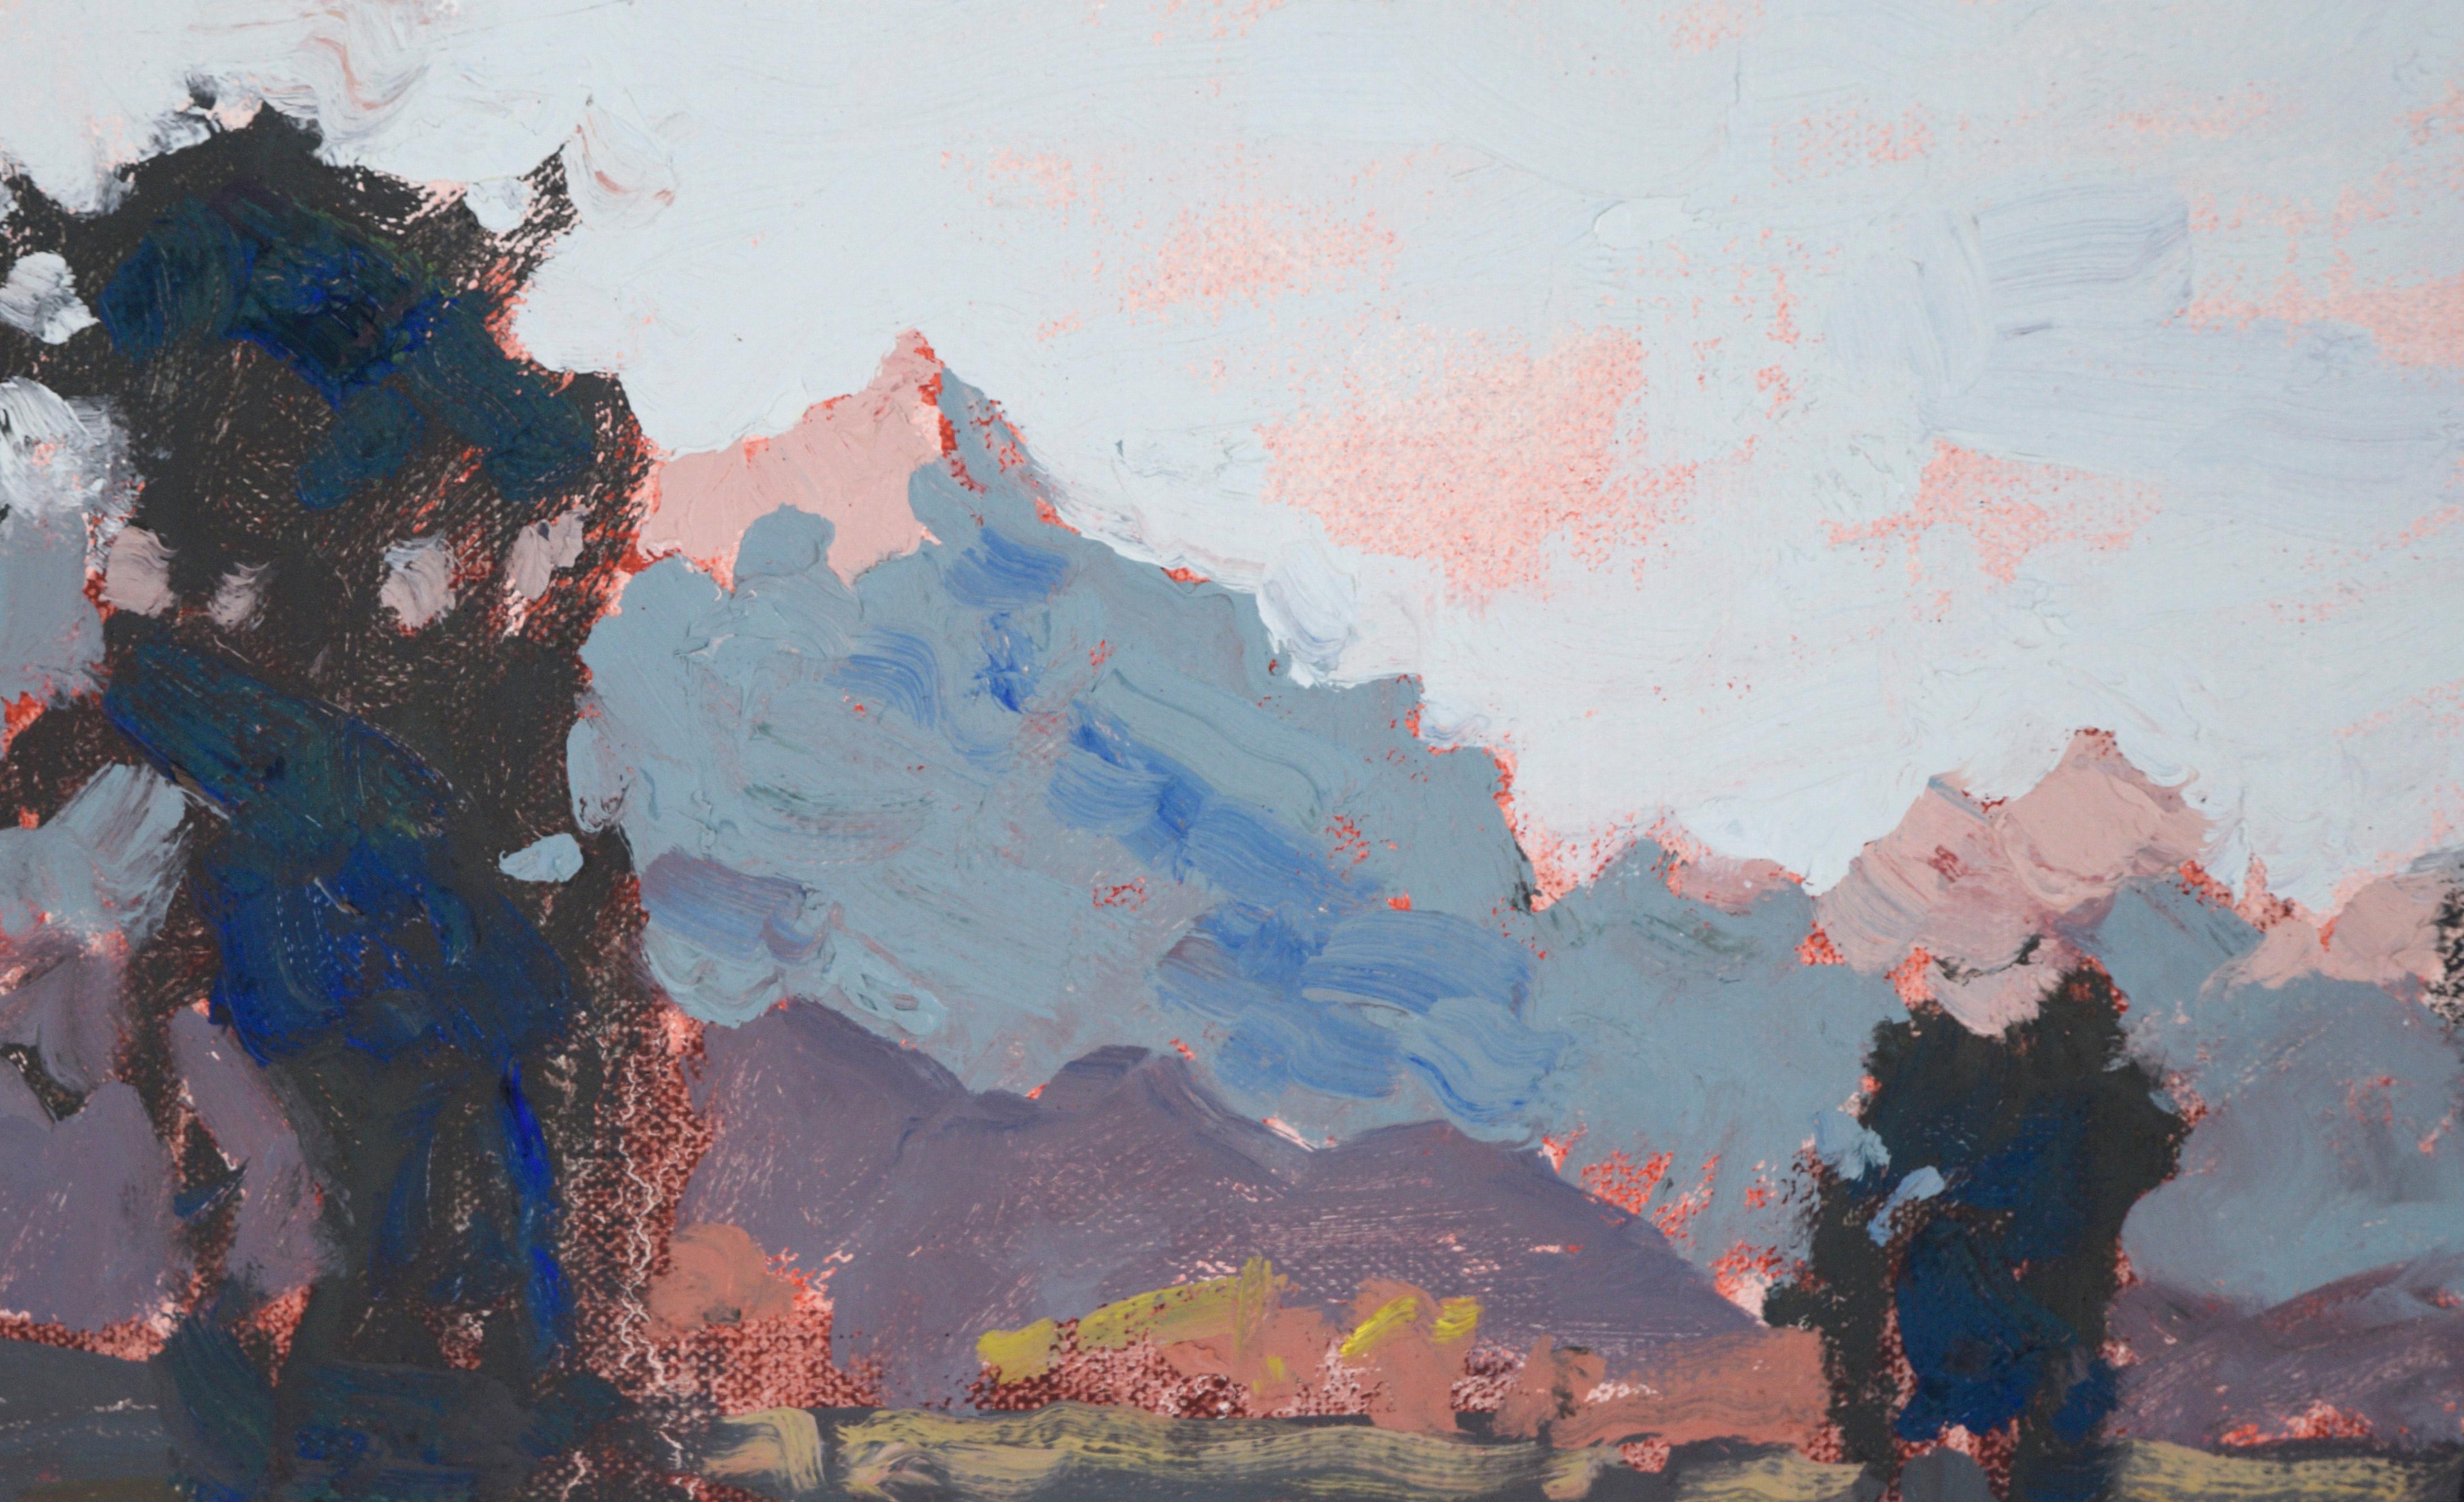 Sunset at Grand Teton National Park - Plein Aire Landscape in Oil on Board - Painting by Thomas Bradshaw